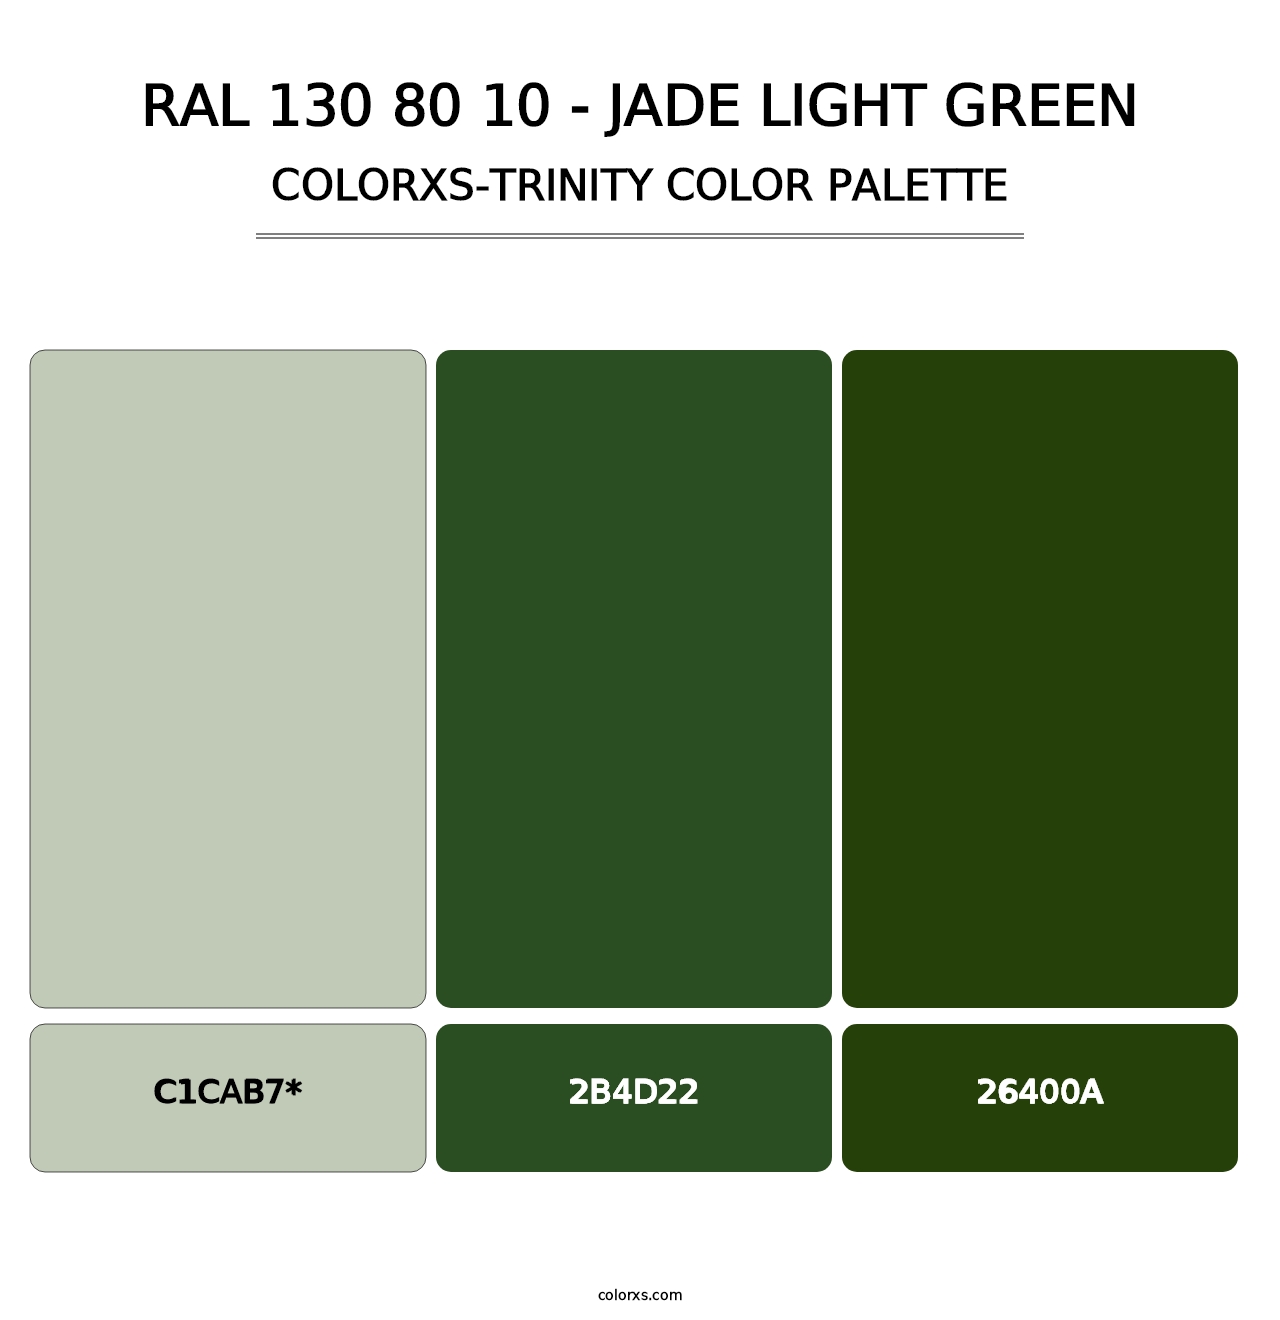 RAL 130 80 10 - Jade Light Green - Colorxs Trinity Palette